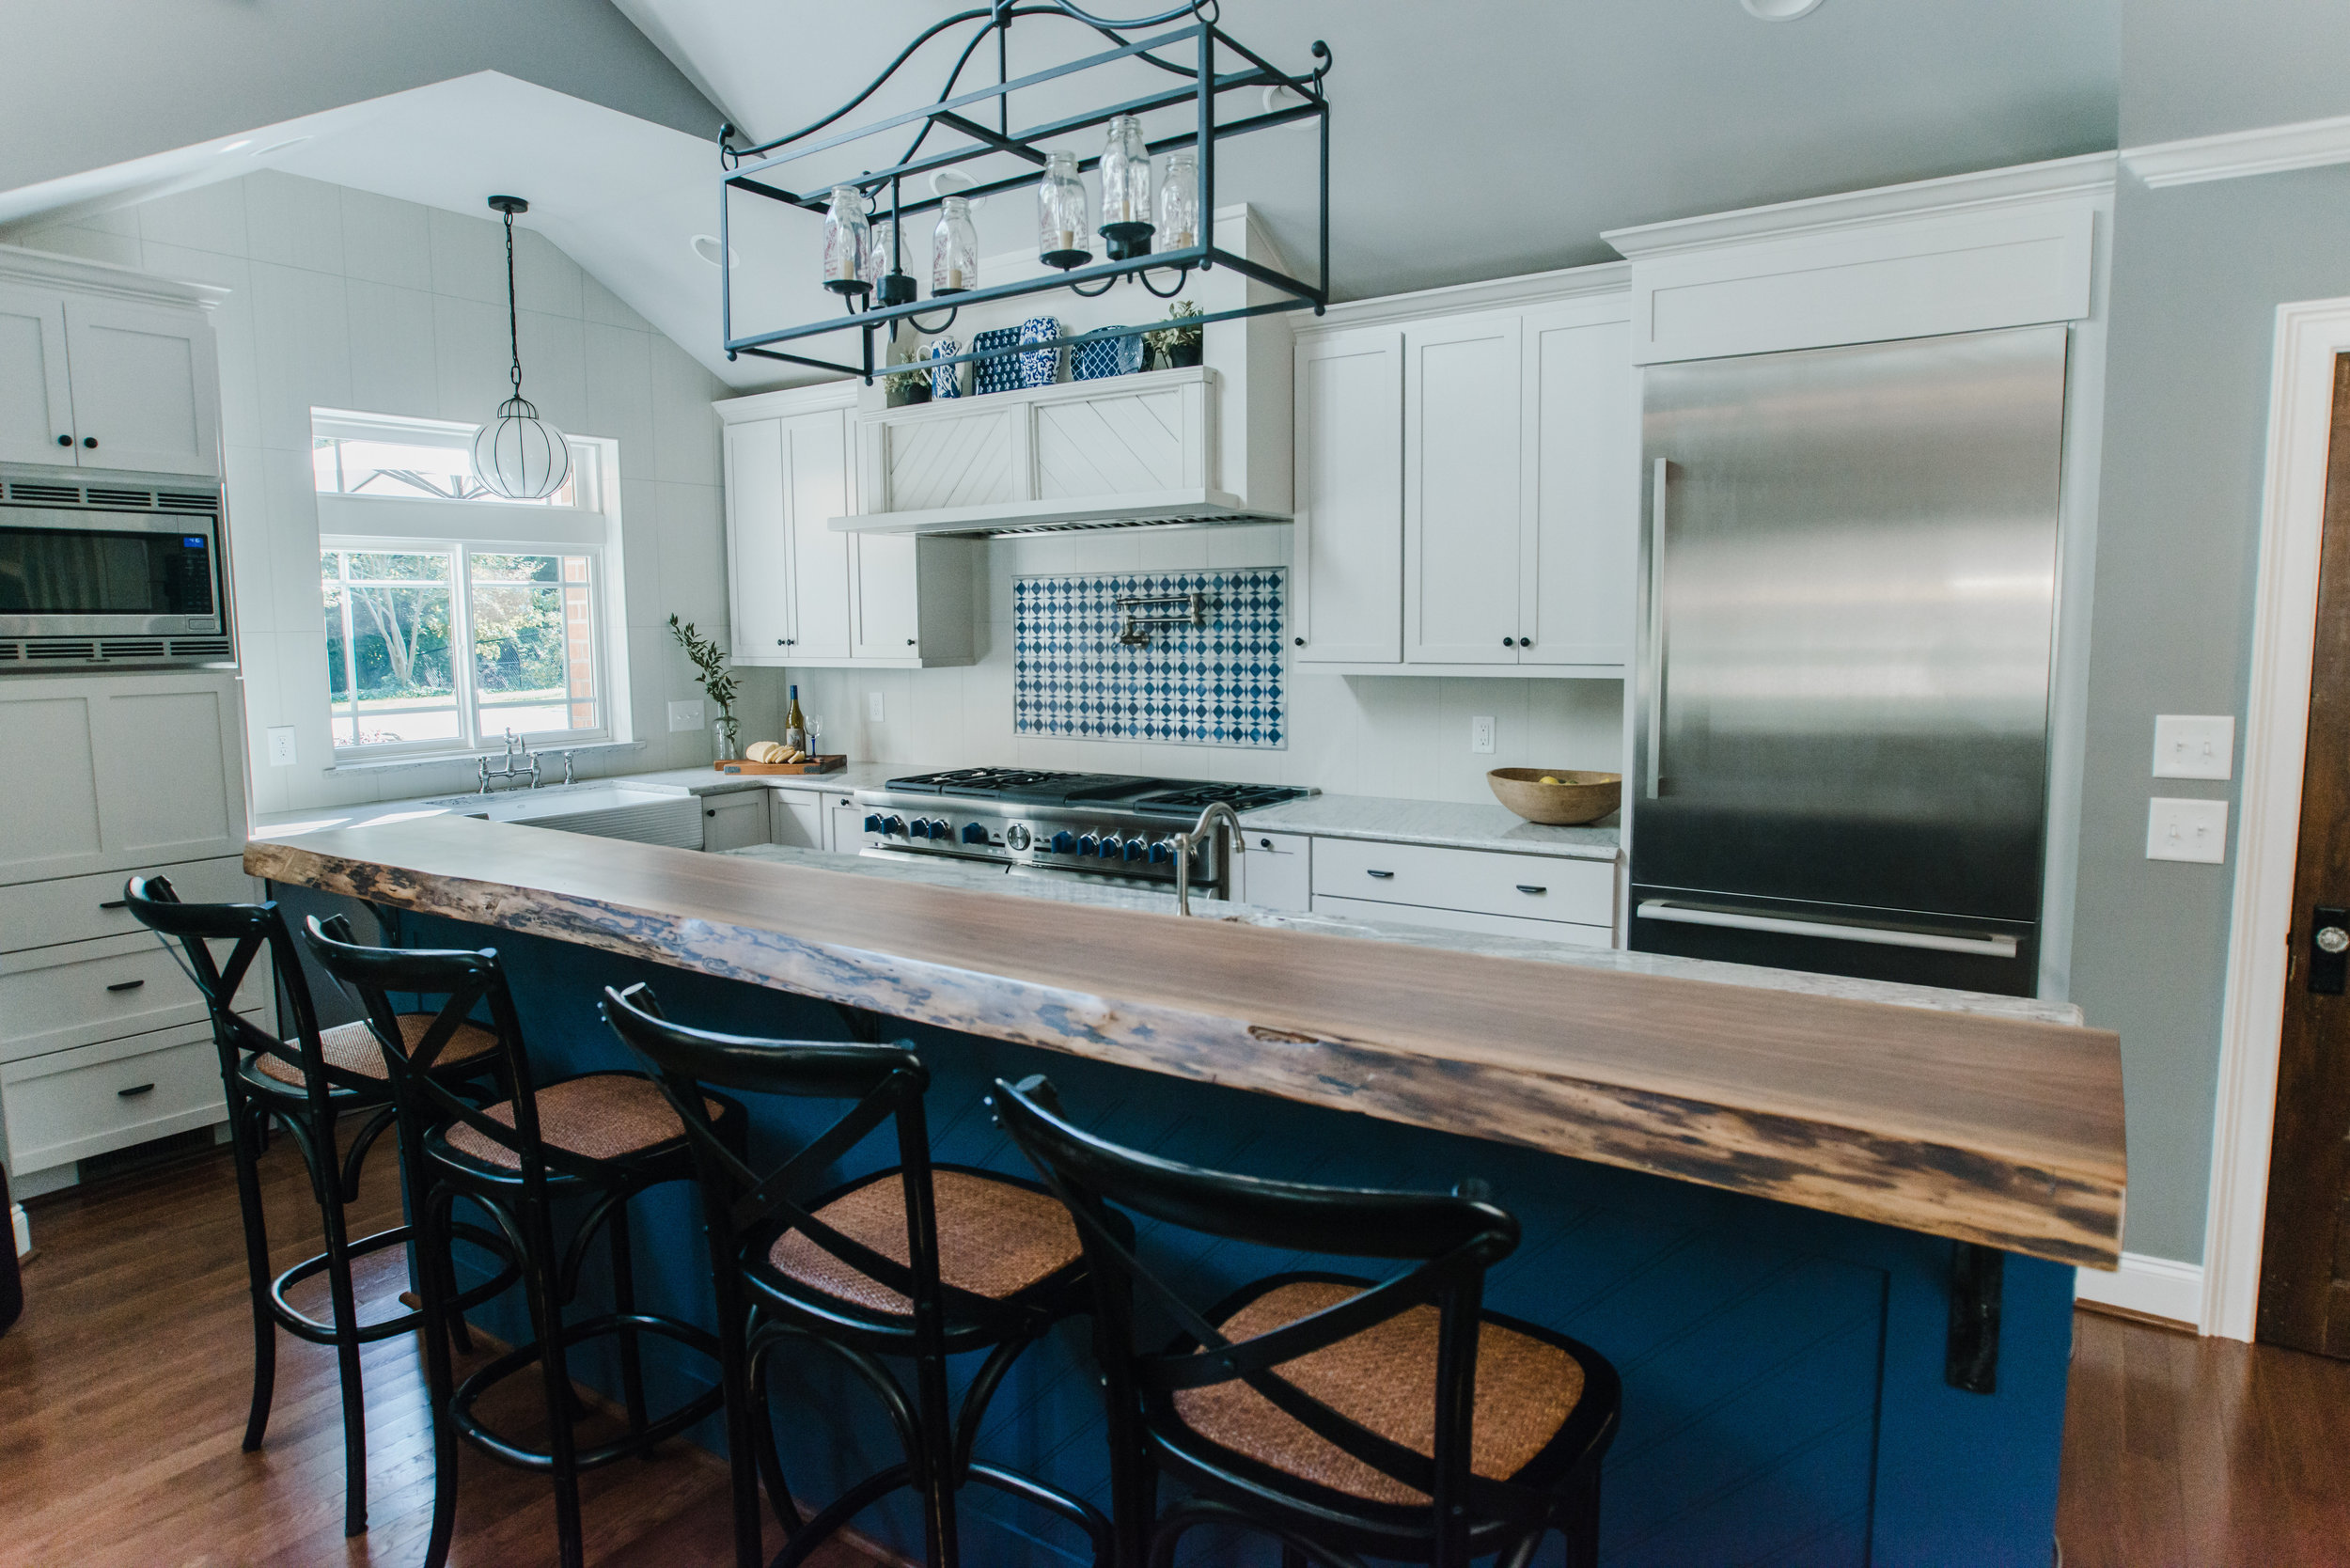 A clean white and blue kitchen design by NC Lake Norman interior designer, 180 Spaces.